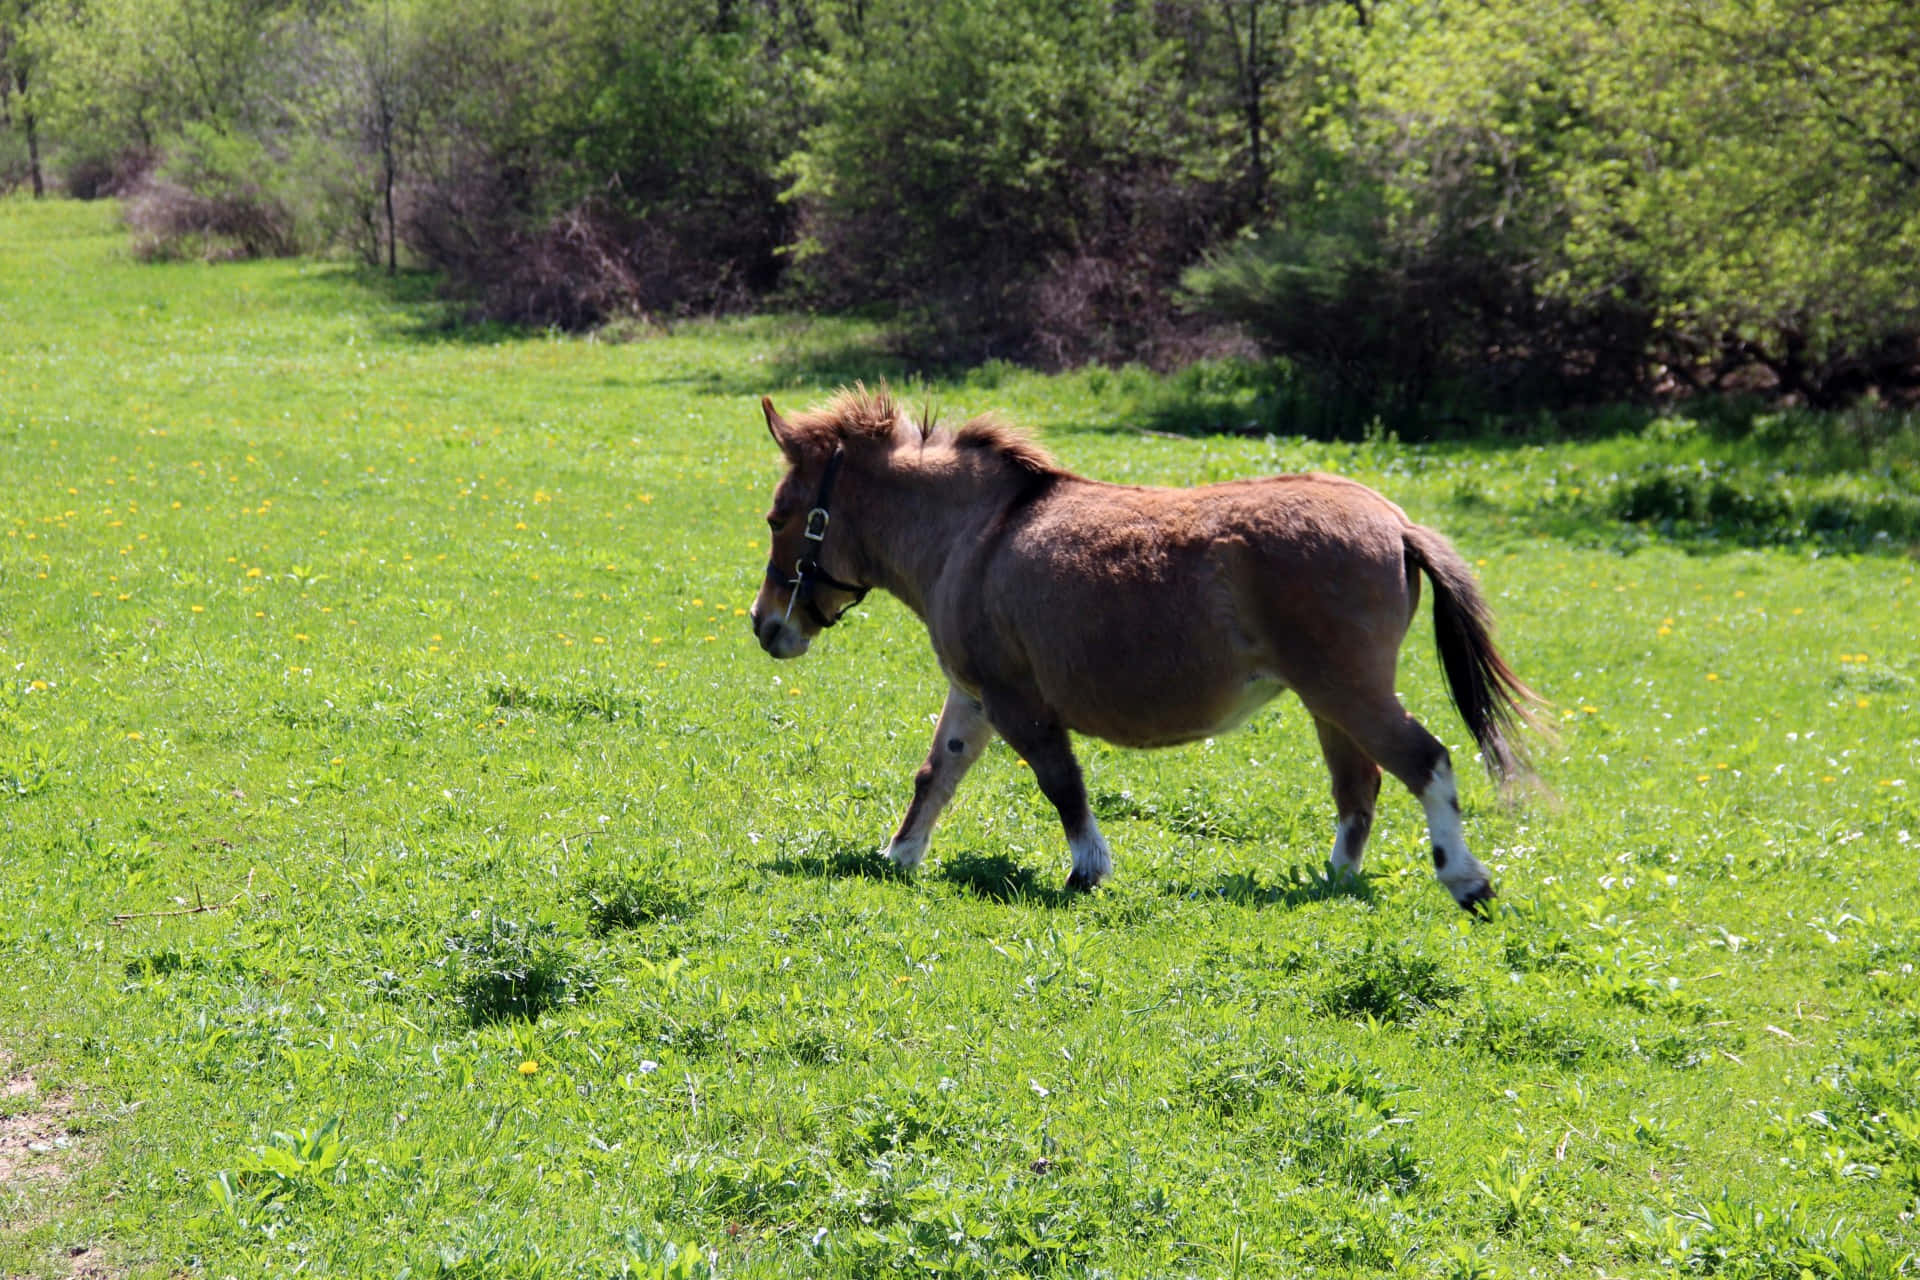 Take in the beauty of this pony as it takes a gentle walk in the grass